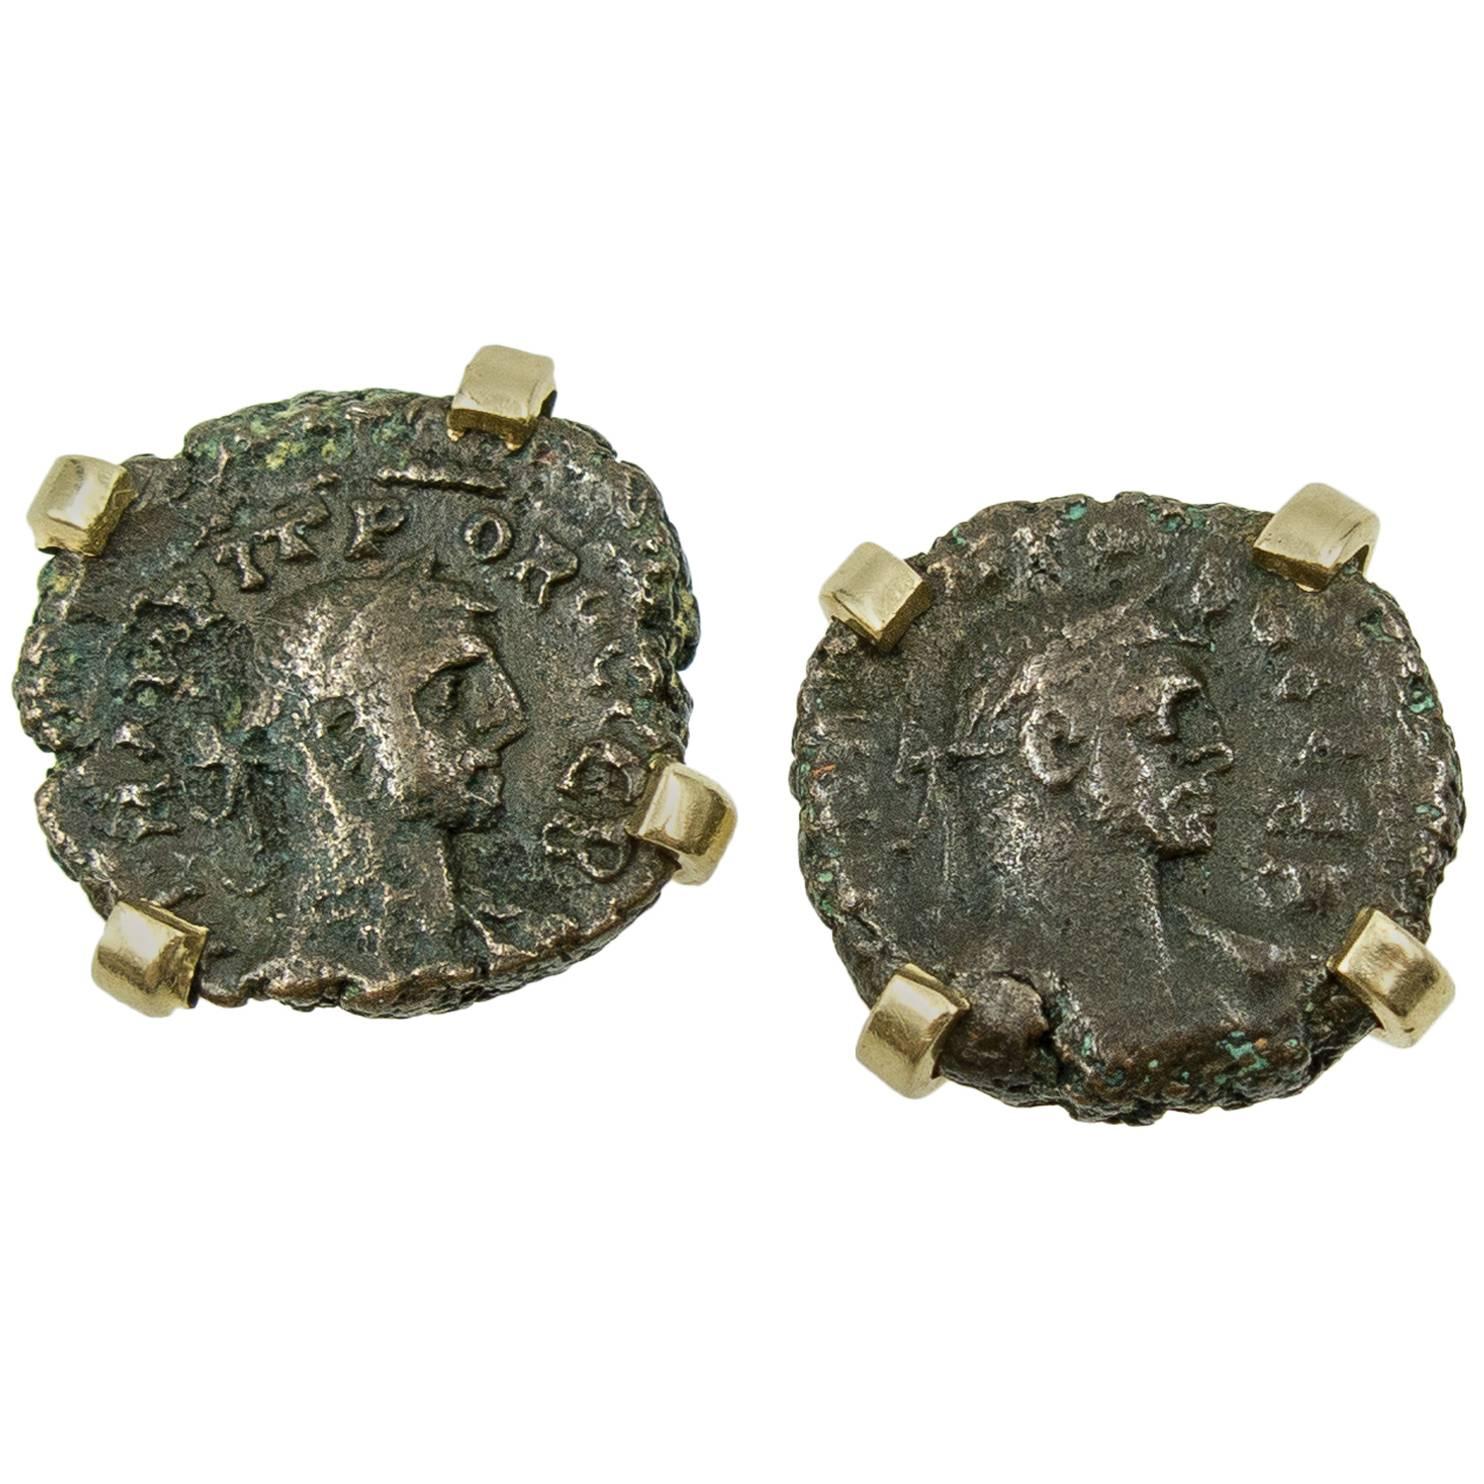   Elegant Ancient Coin and Gold Cufflinks